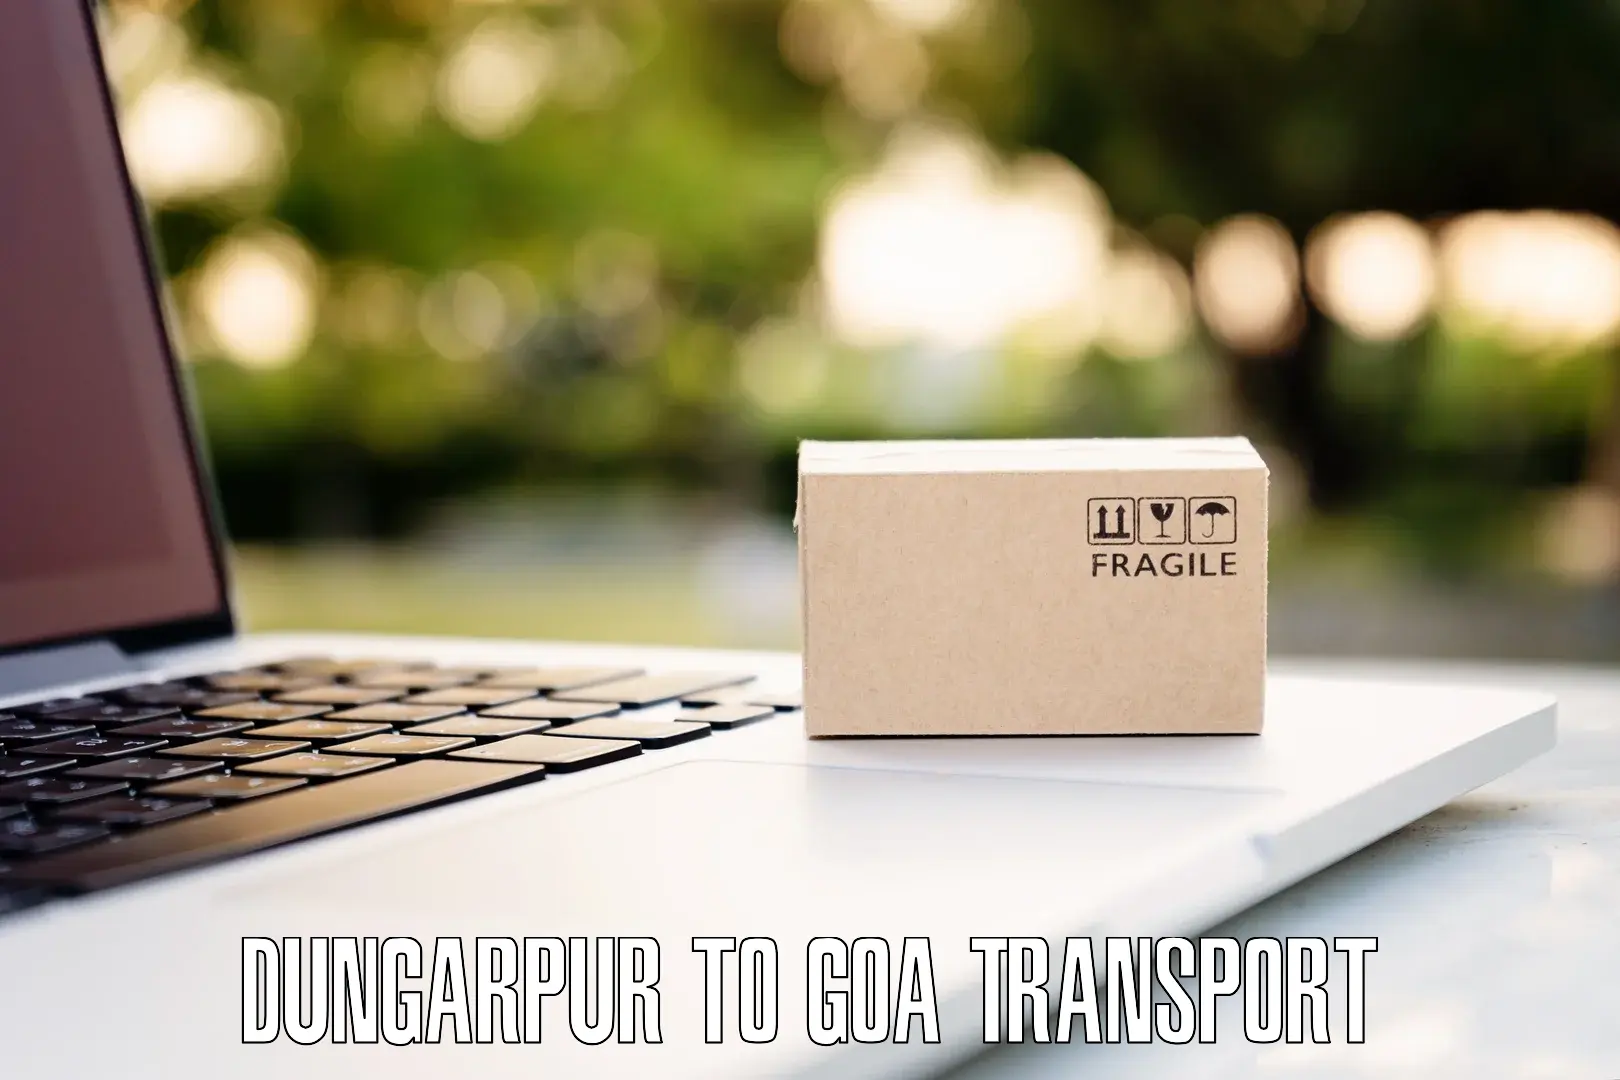 Transport bike from one state to another Dungarpur to Goa University